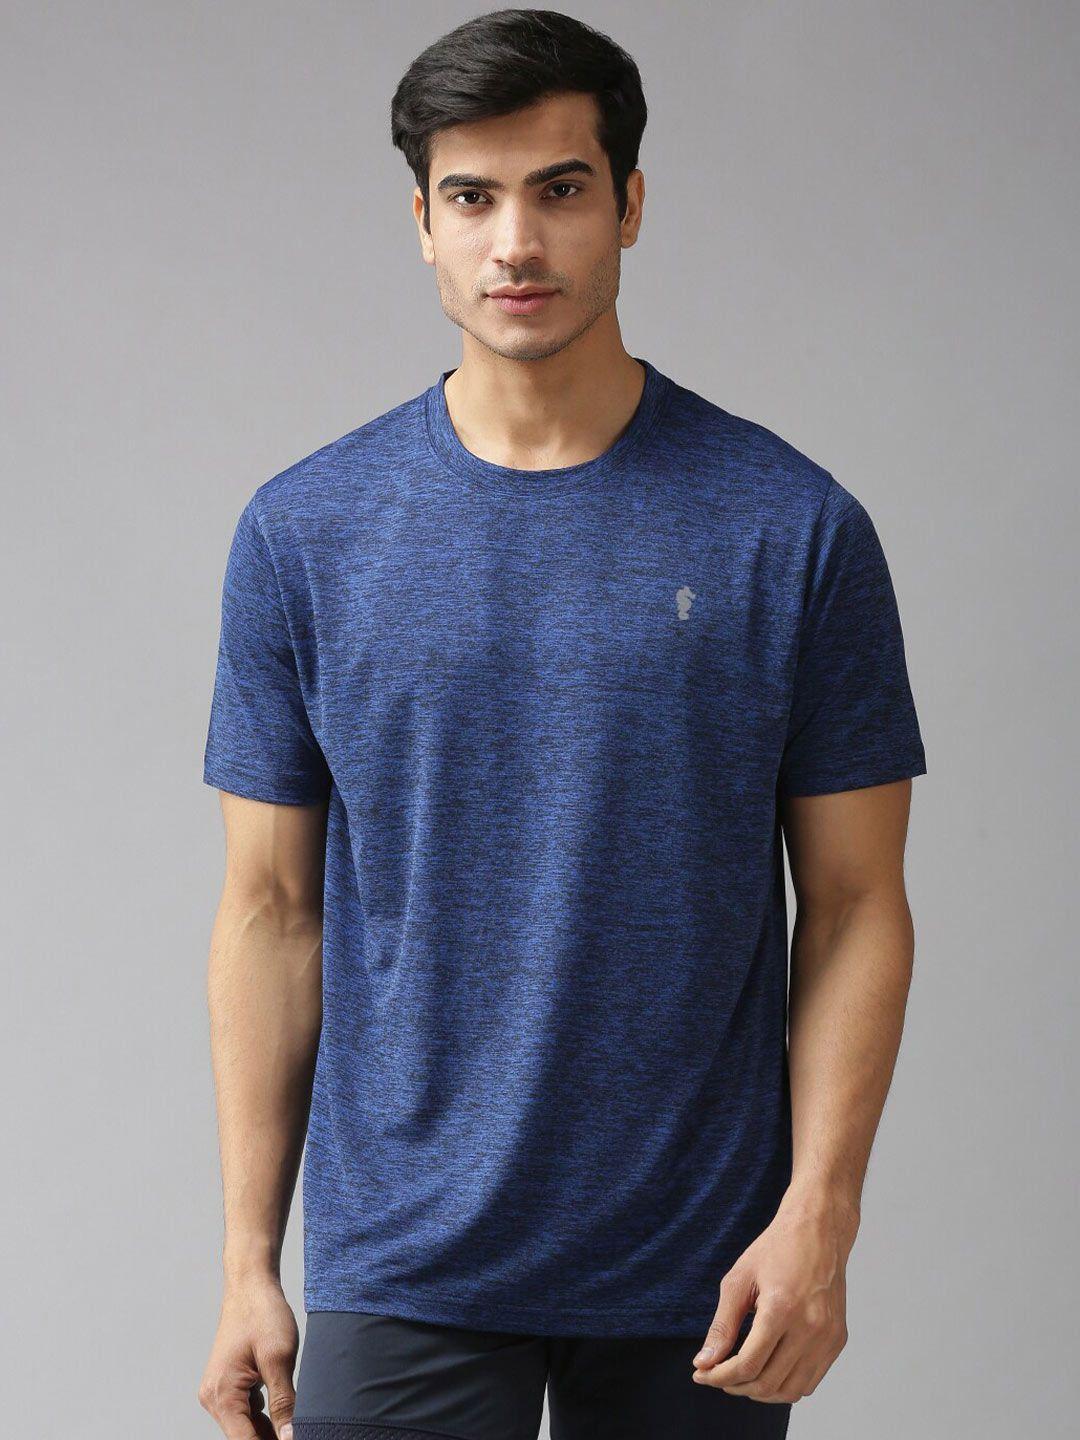 eppe men round neck dry-fit sports t-shirt